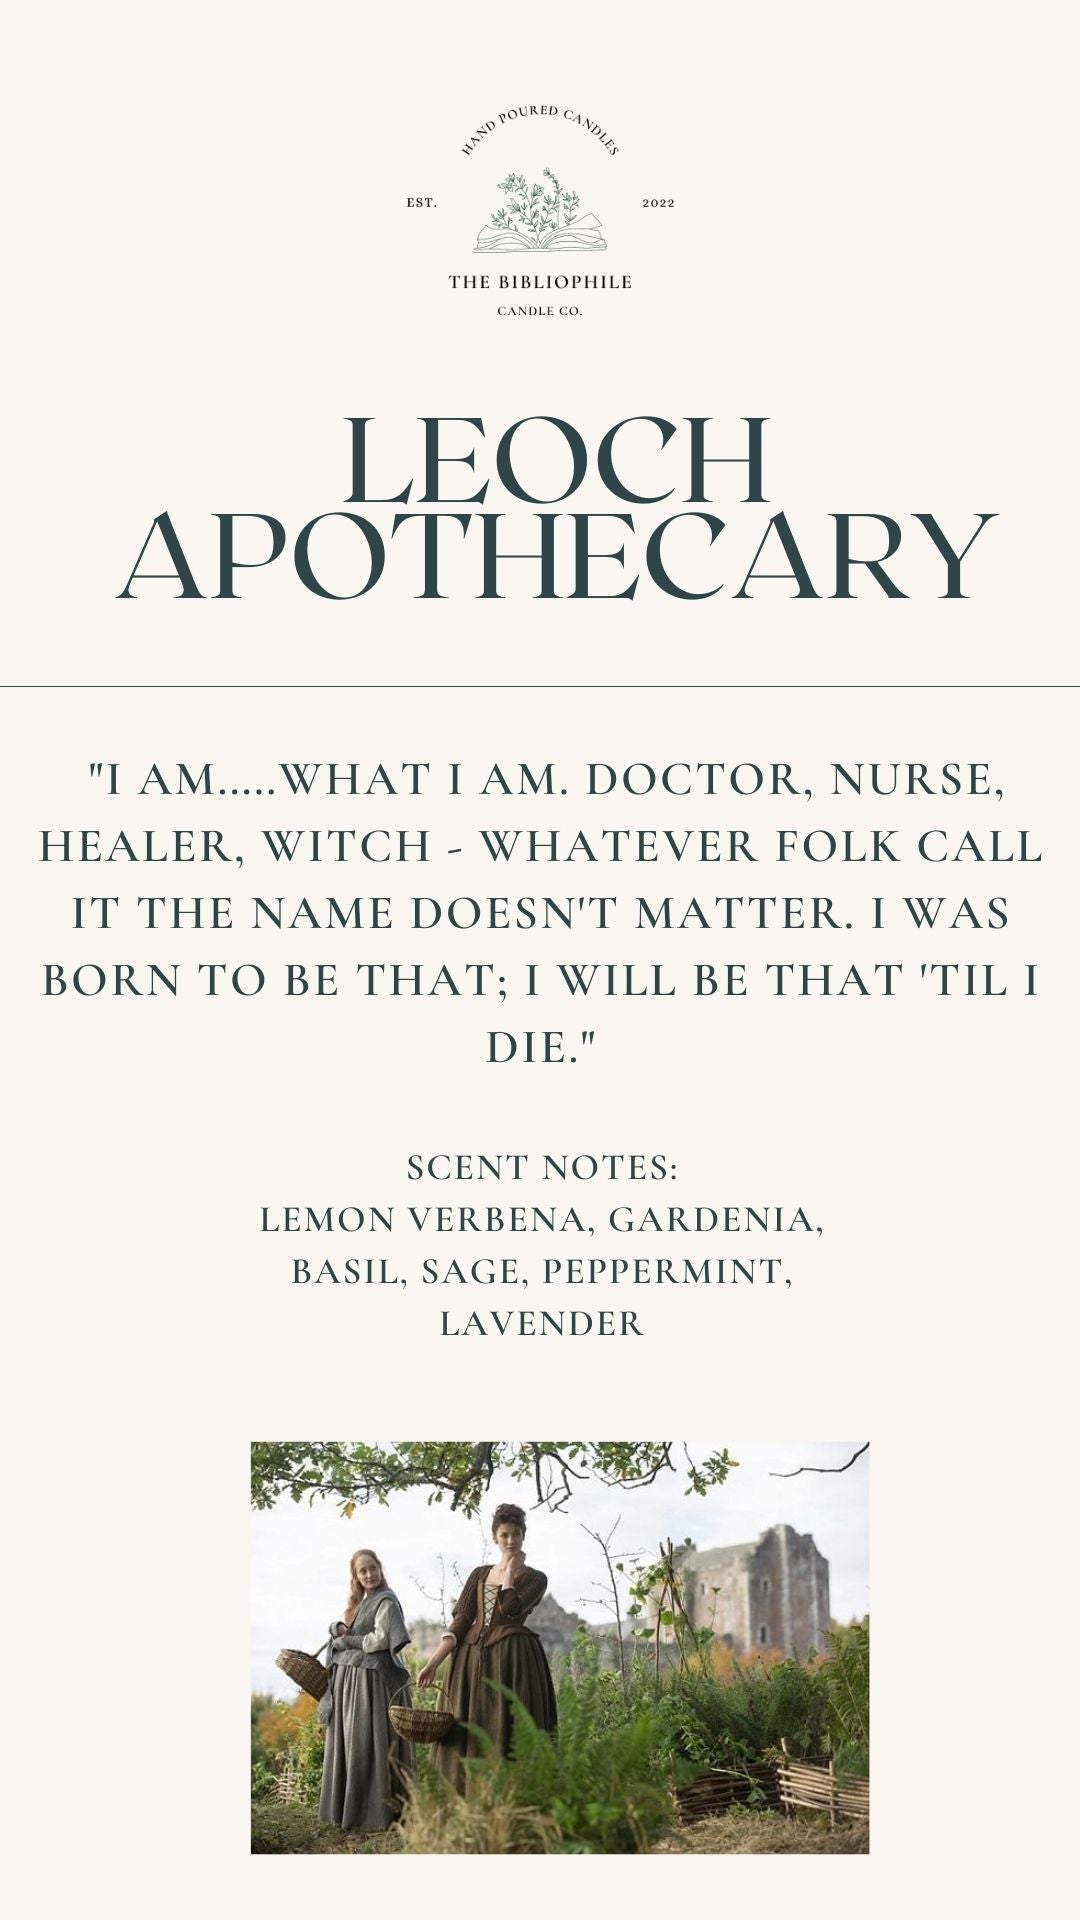 Leoch Apothecary Scented Candle